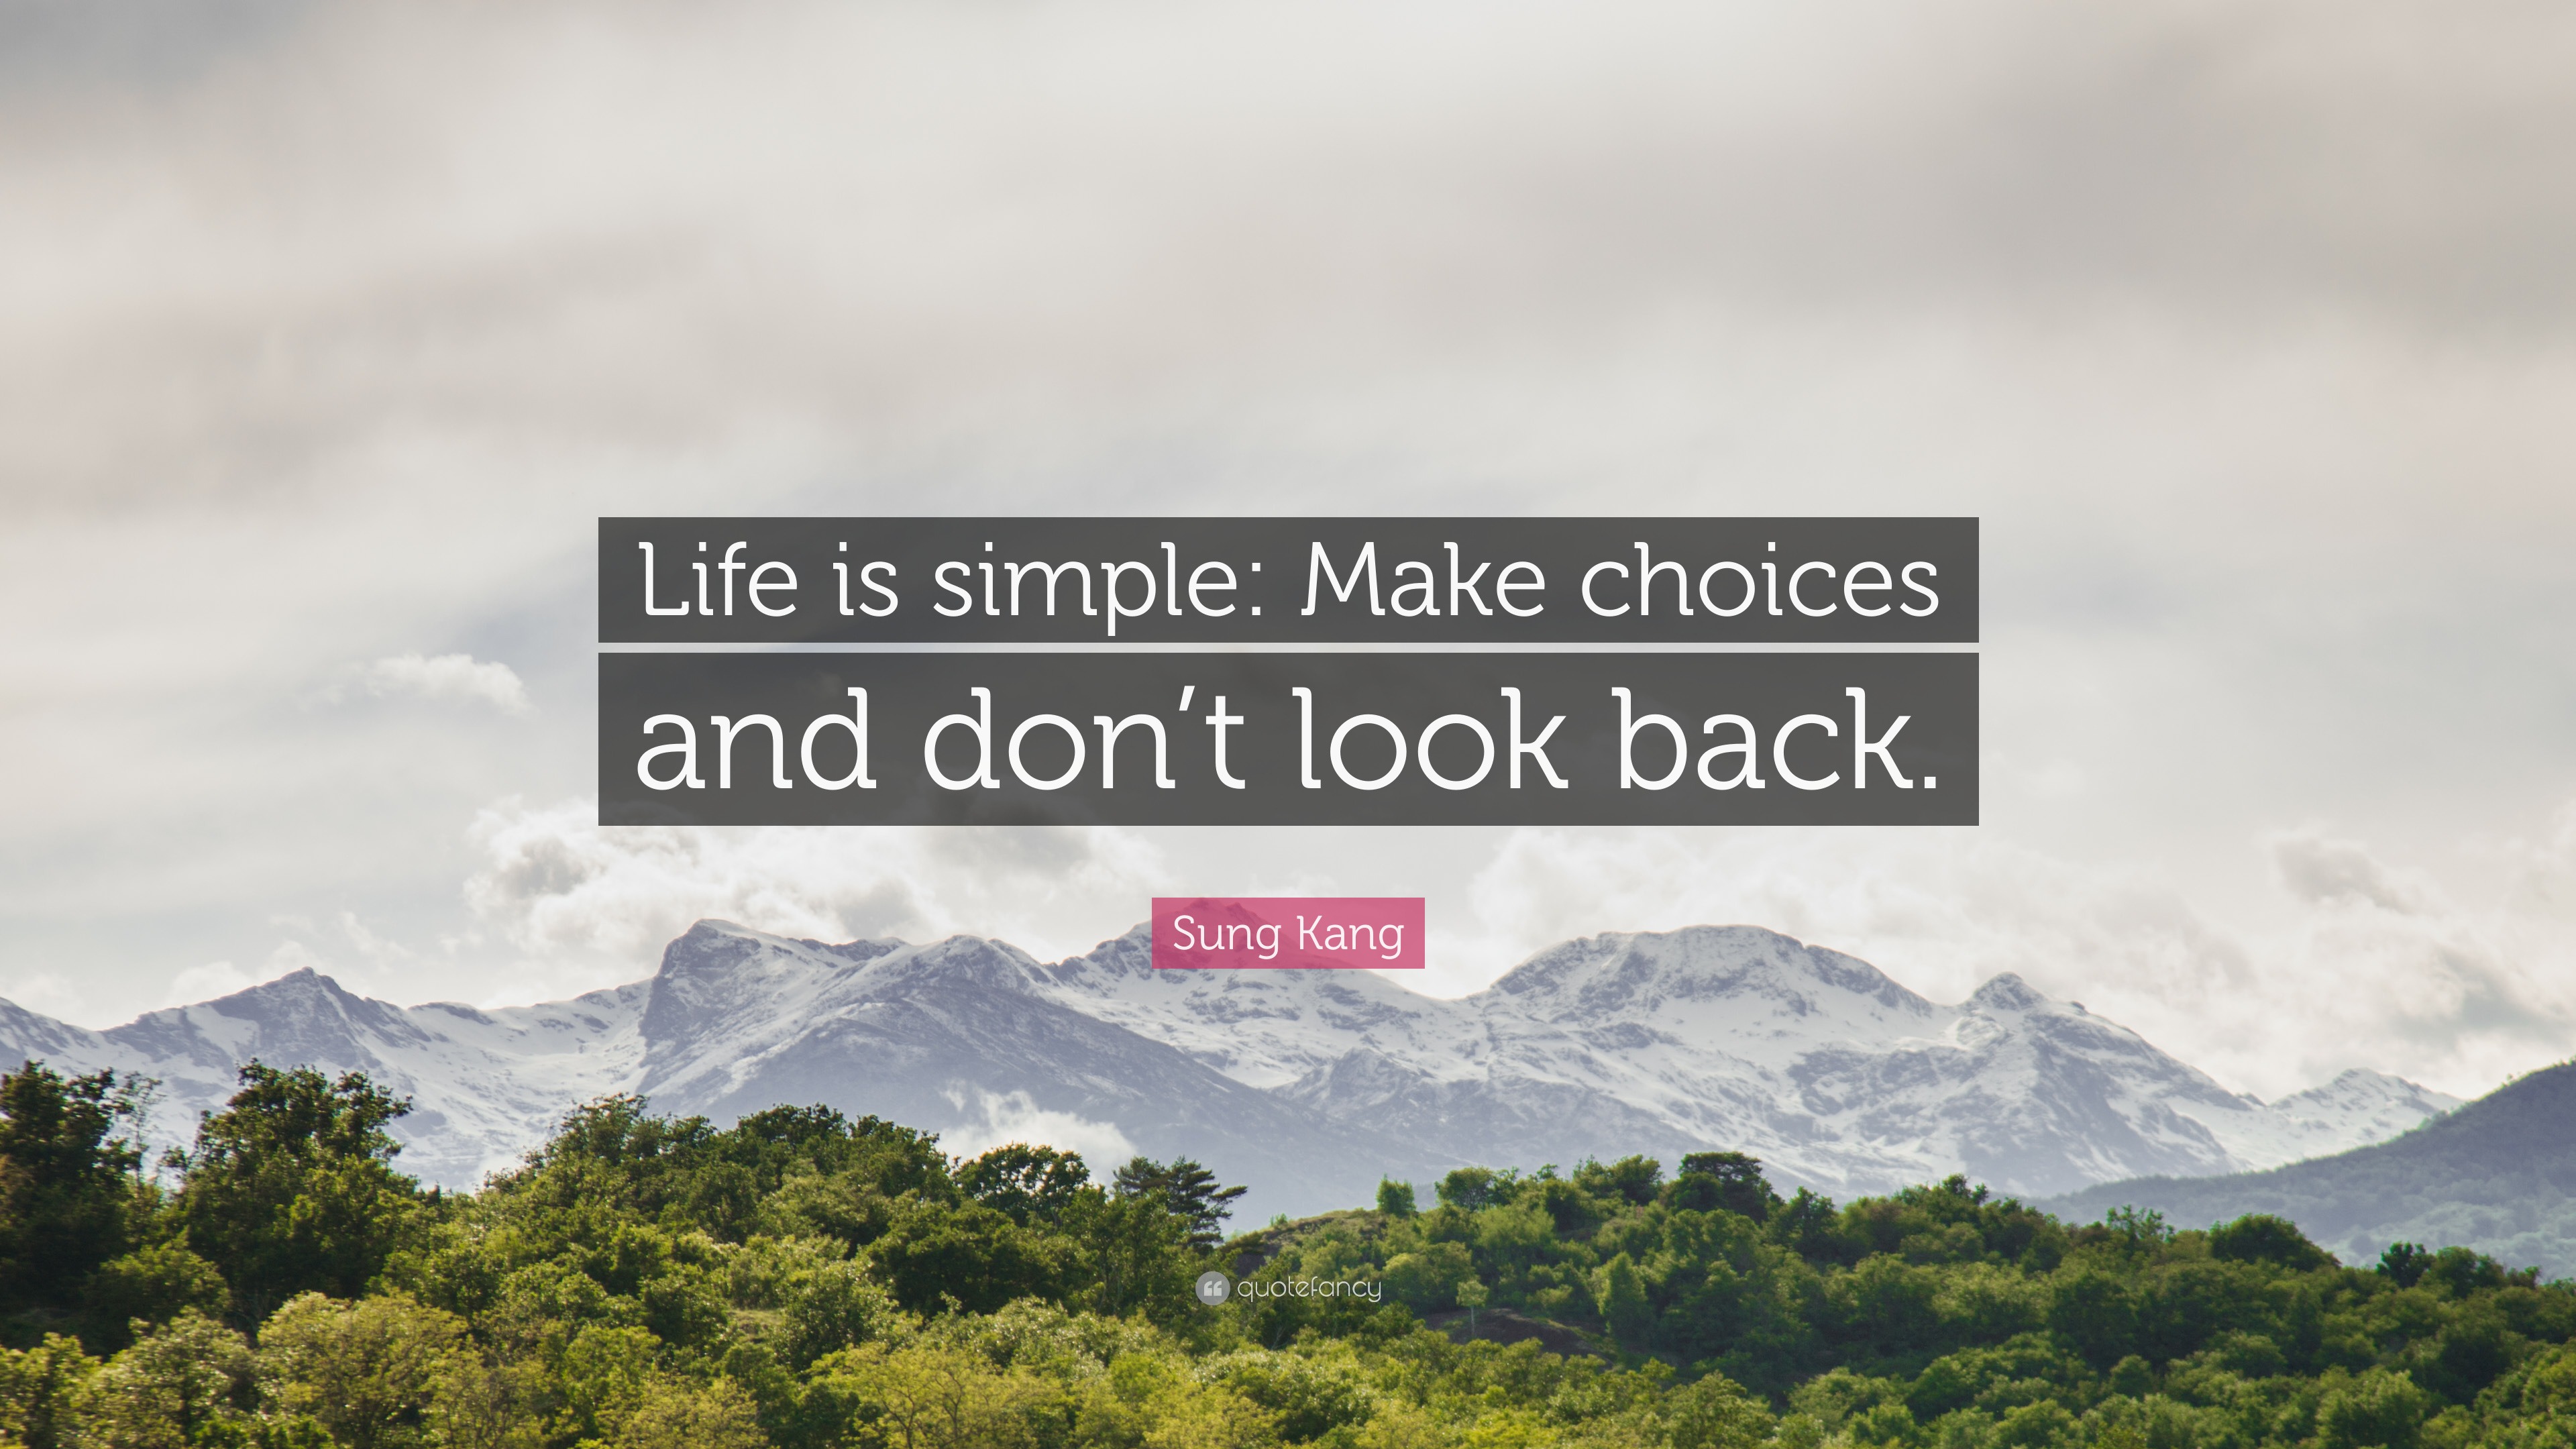 https://quotefancy.com/media/wallpaper/3840x2160/2045188-Sung-Kang-Quote-Life-is-simple-Make-choices-and-don-t-look-back.jpg